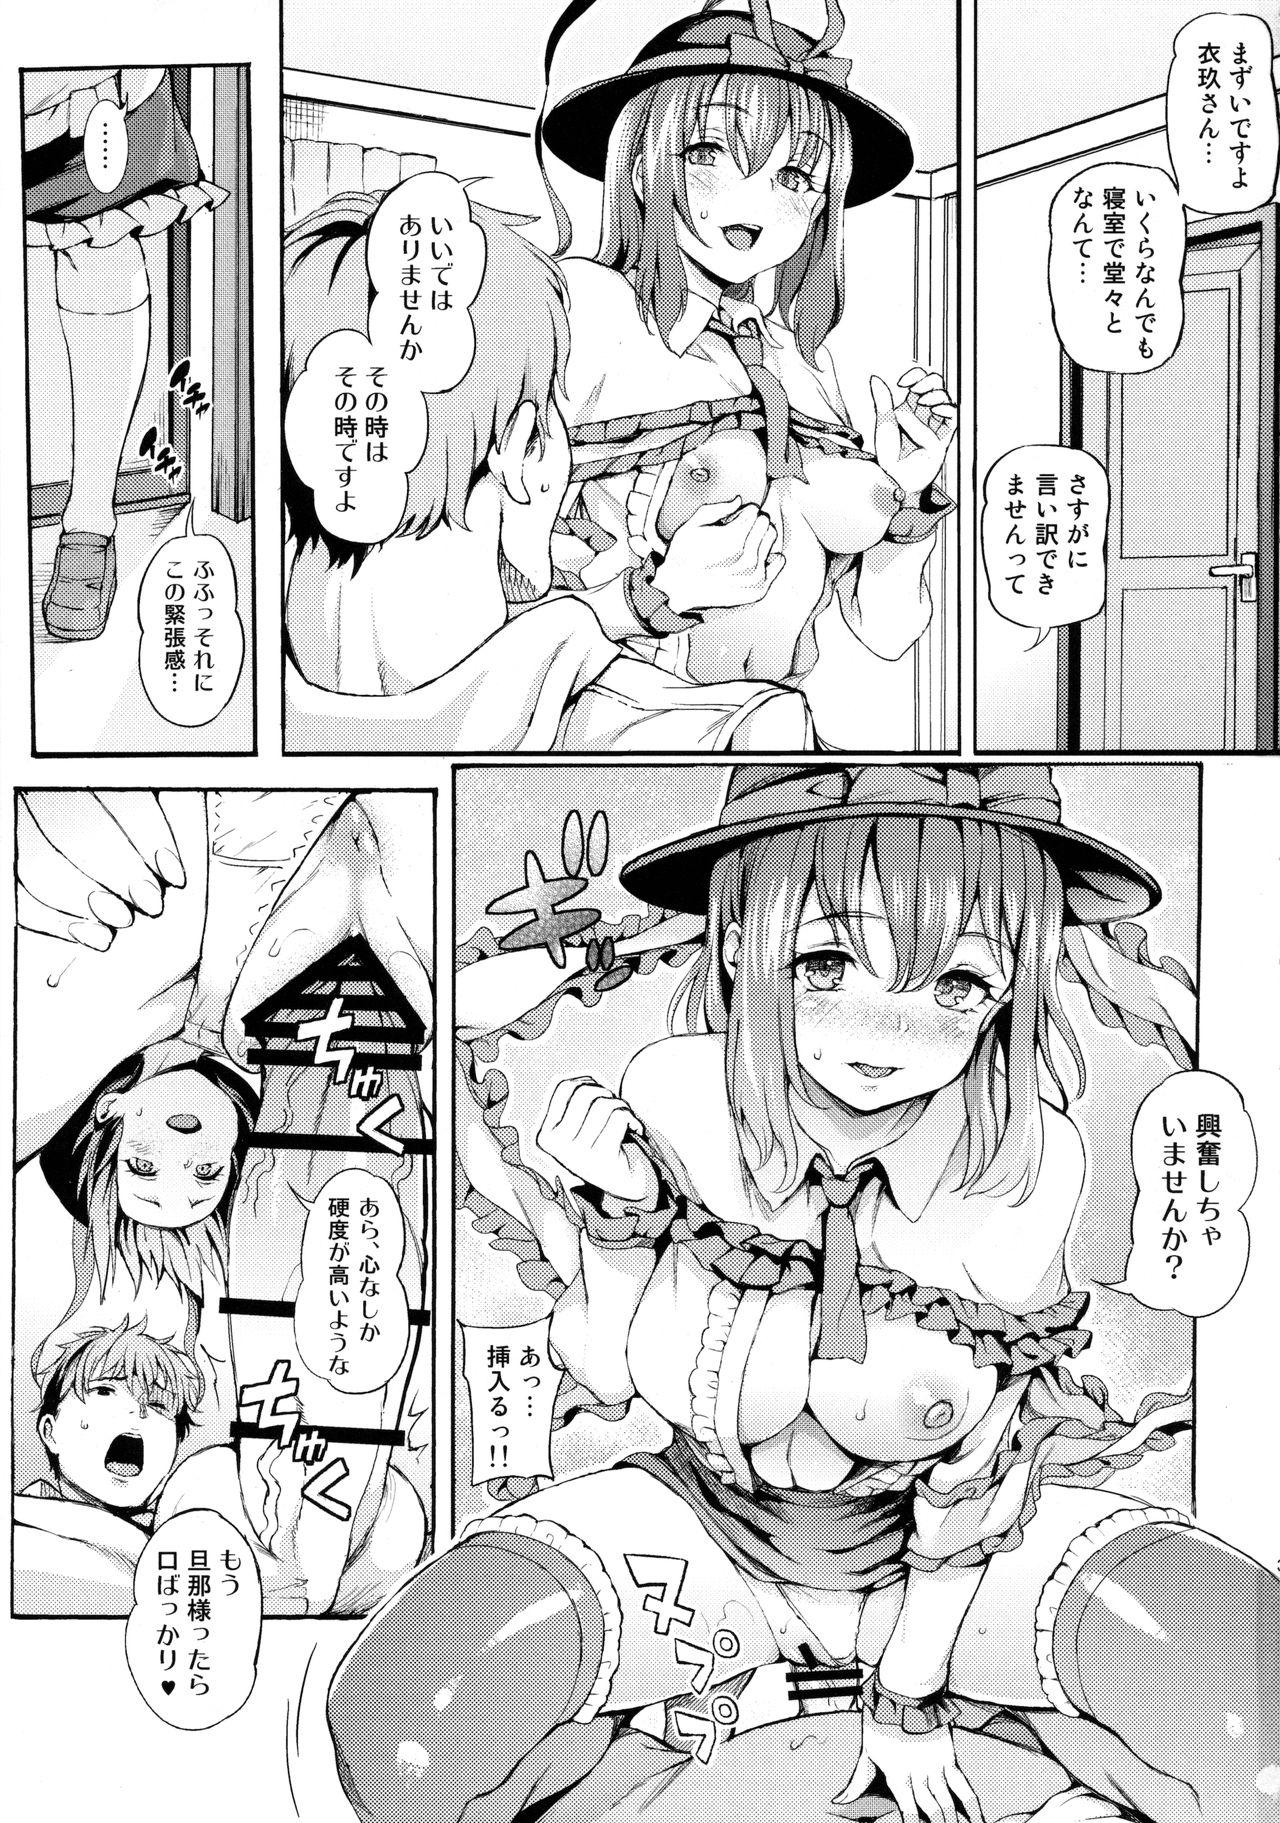 Exhib Second marriage - Touhou project Gay Amateur - Page 2